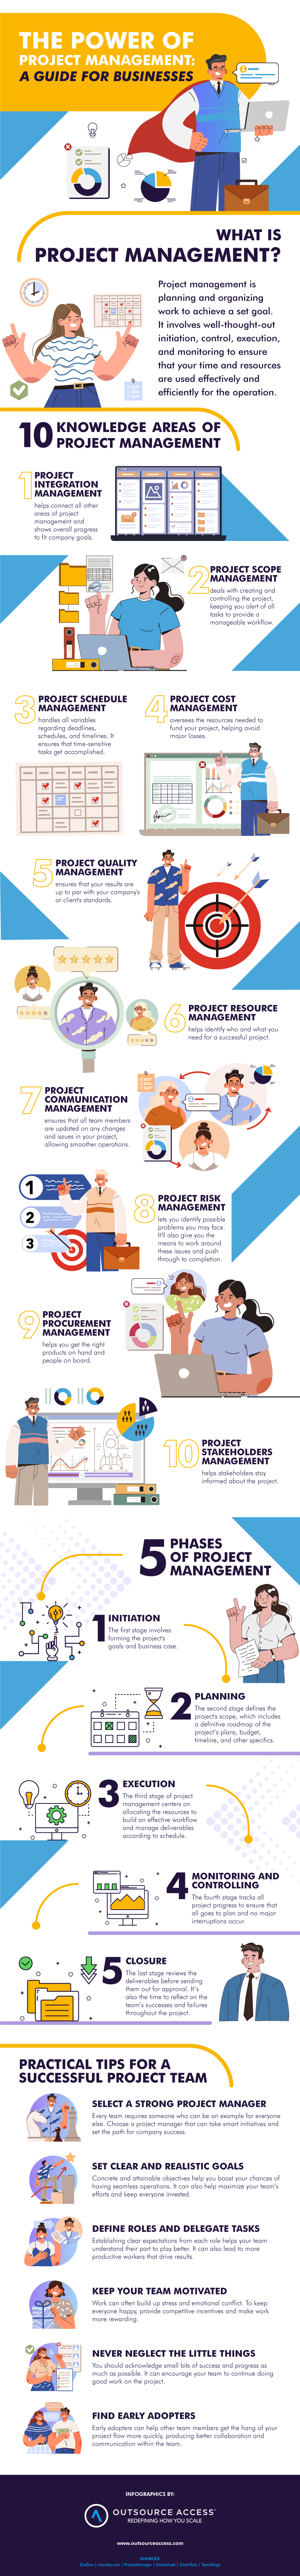 Outsource Access Infographic - Guide to Project Management